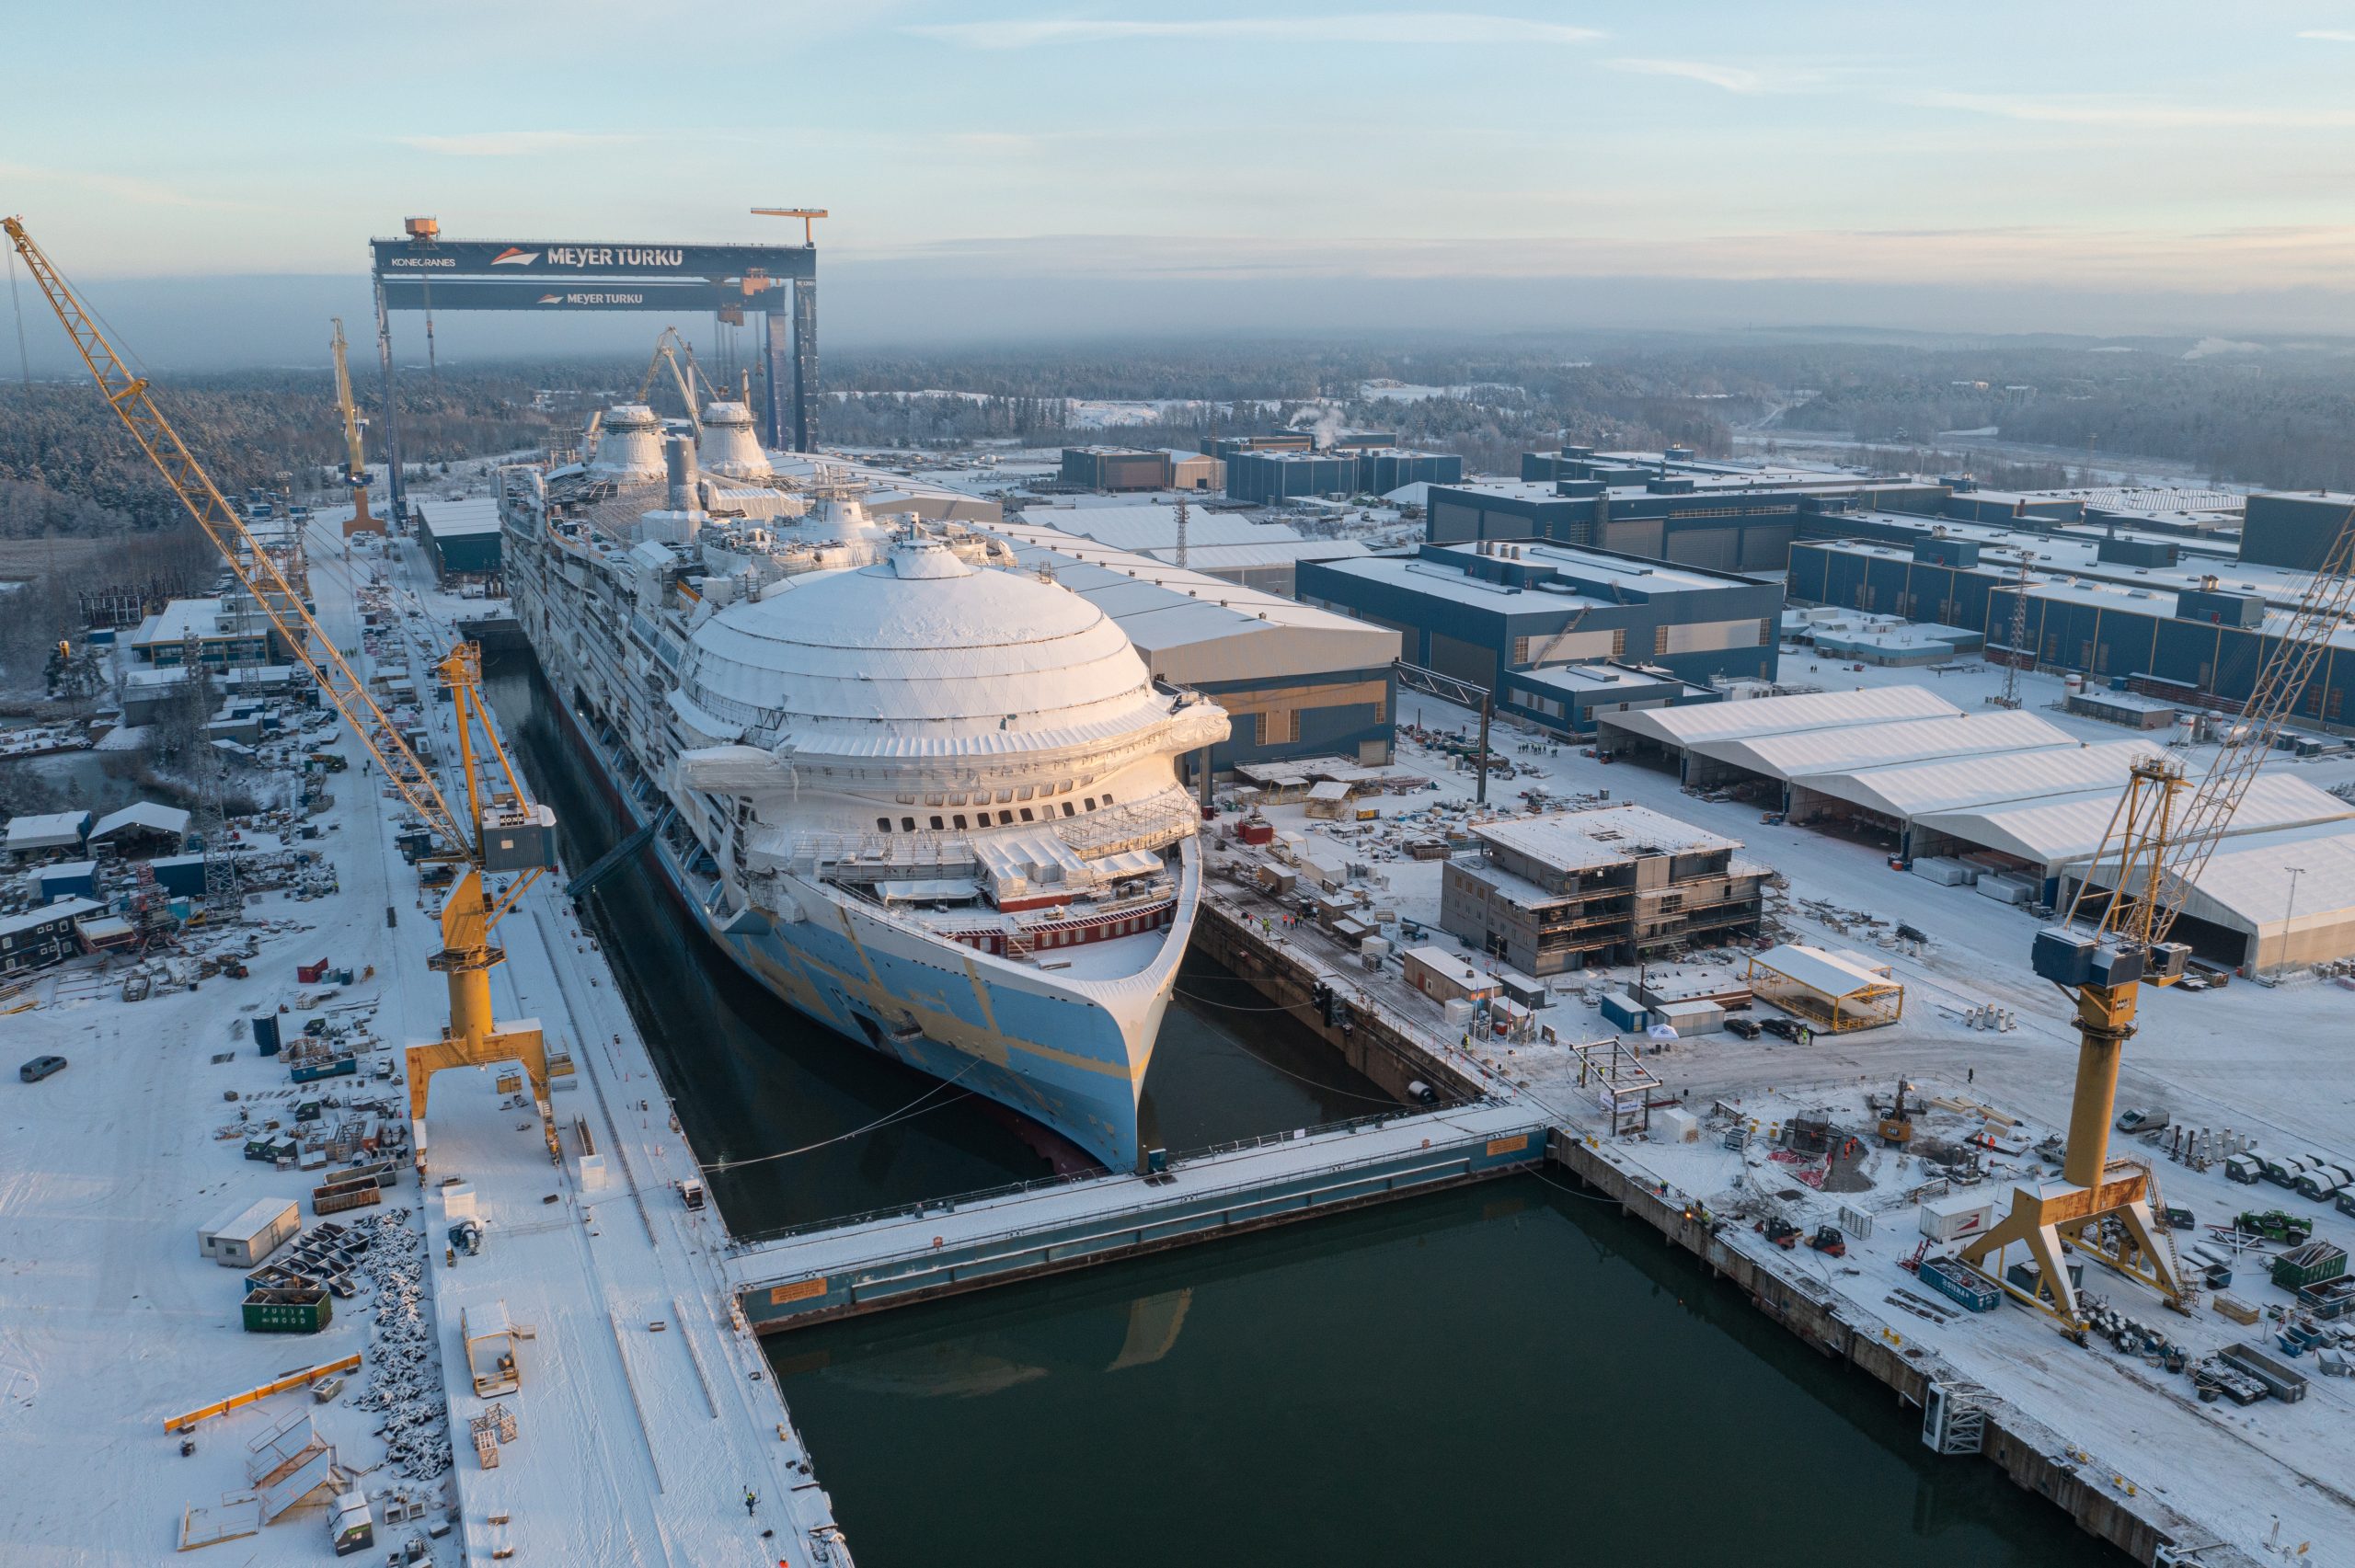 Royal Caribbean's first LNG-powered newbuild launched in Finland